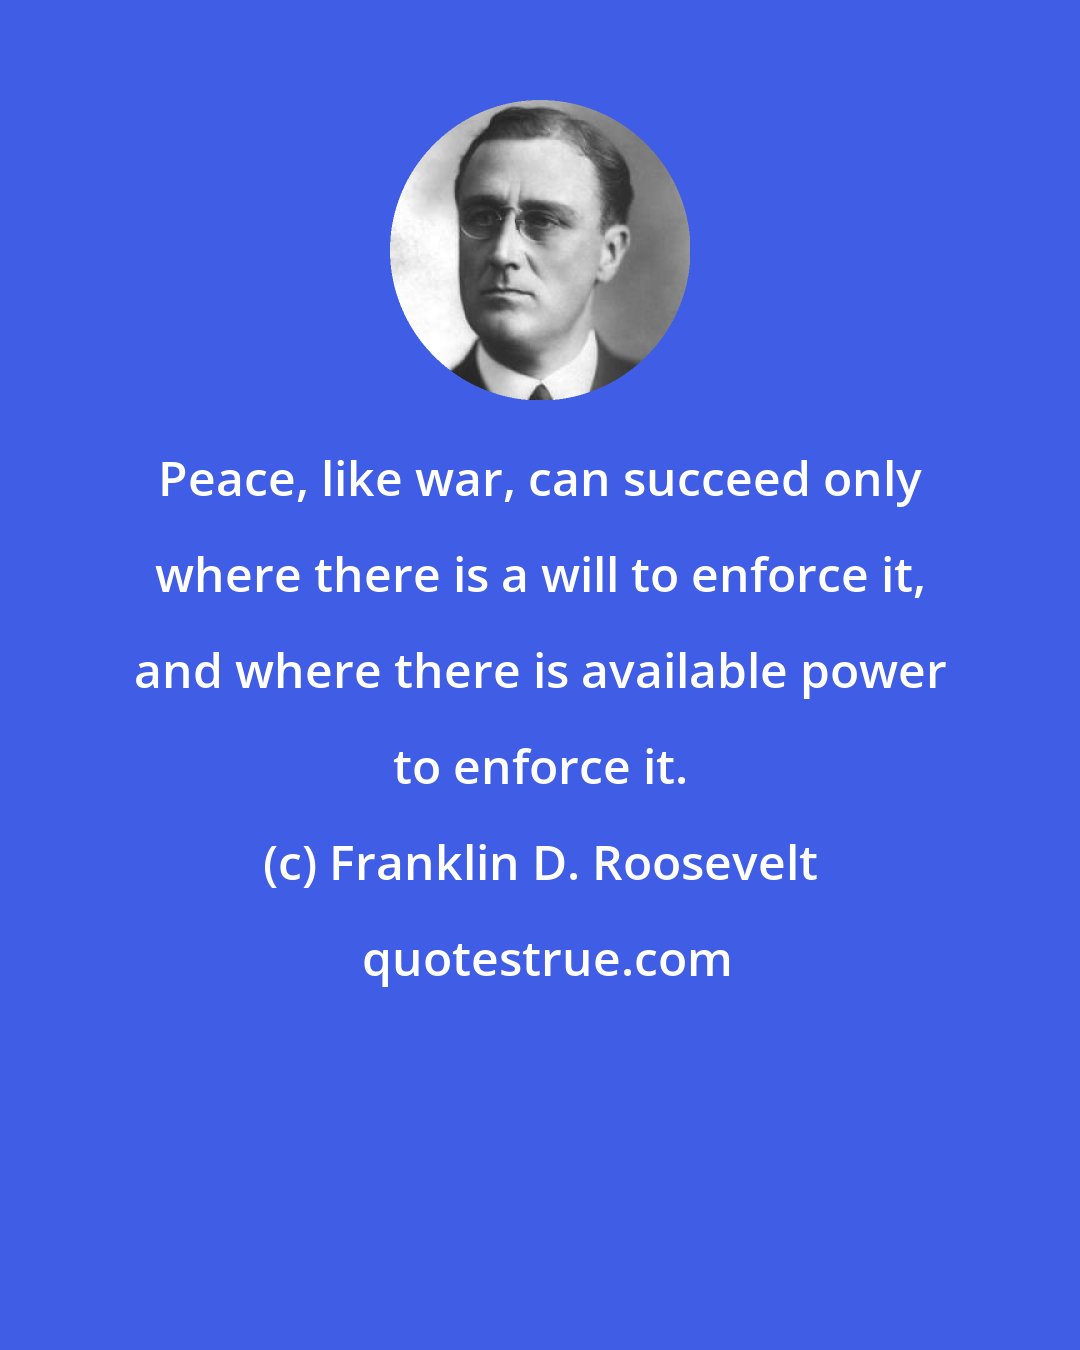 Franklin D. Roosevelt: Peace, like war, can succeed only where there is a will to enforce it, and where there is available power to enforce it.